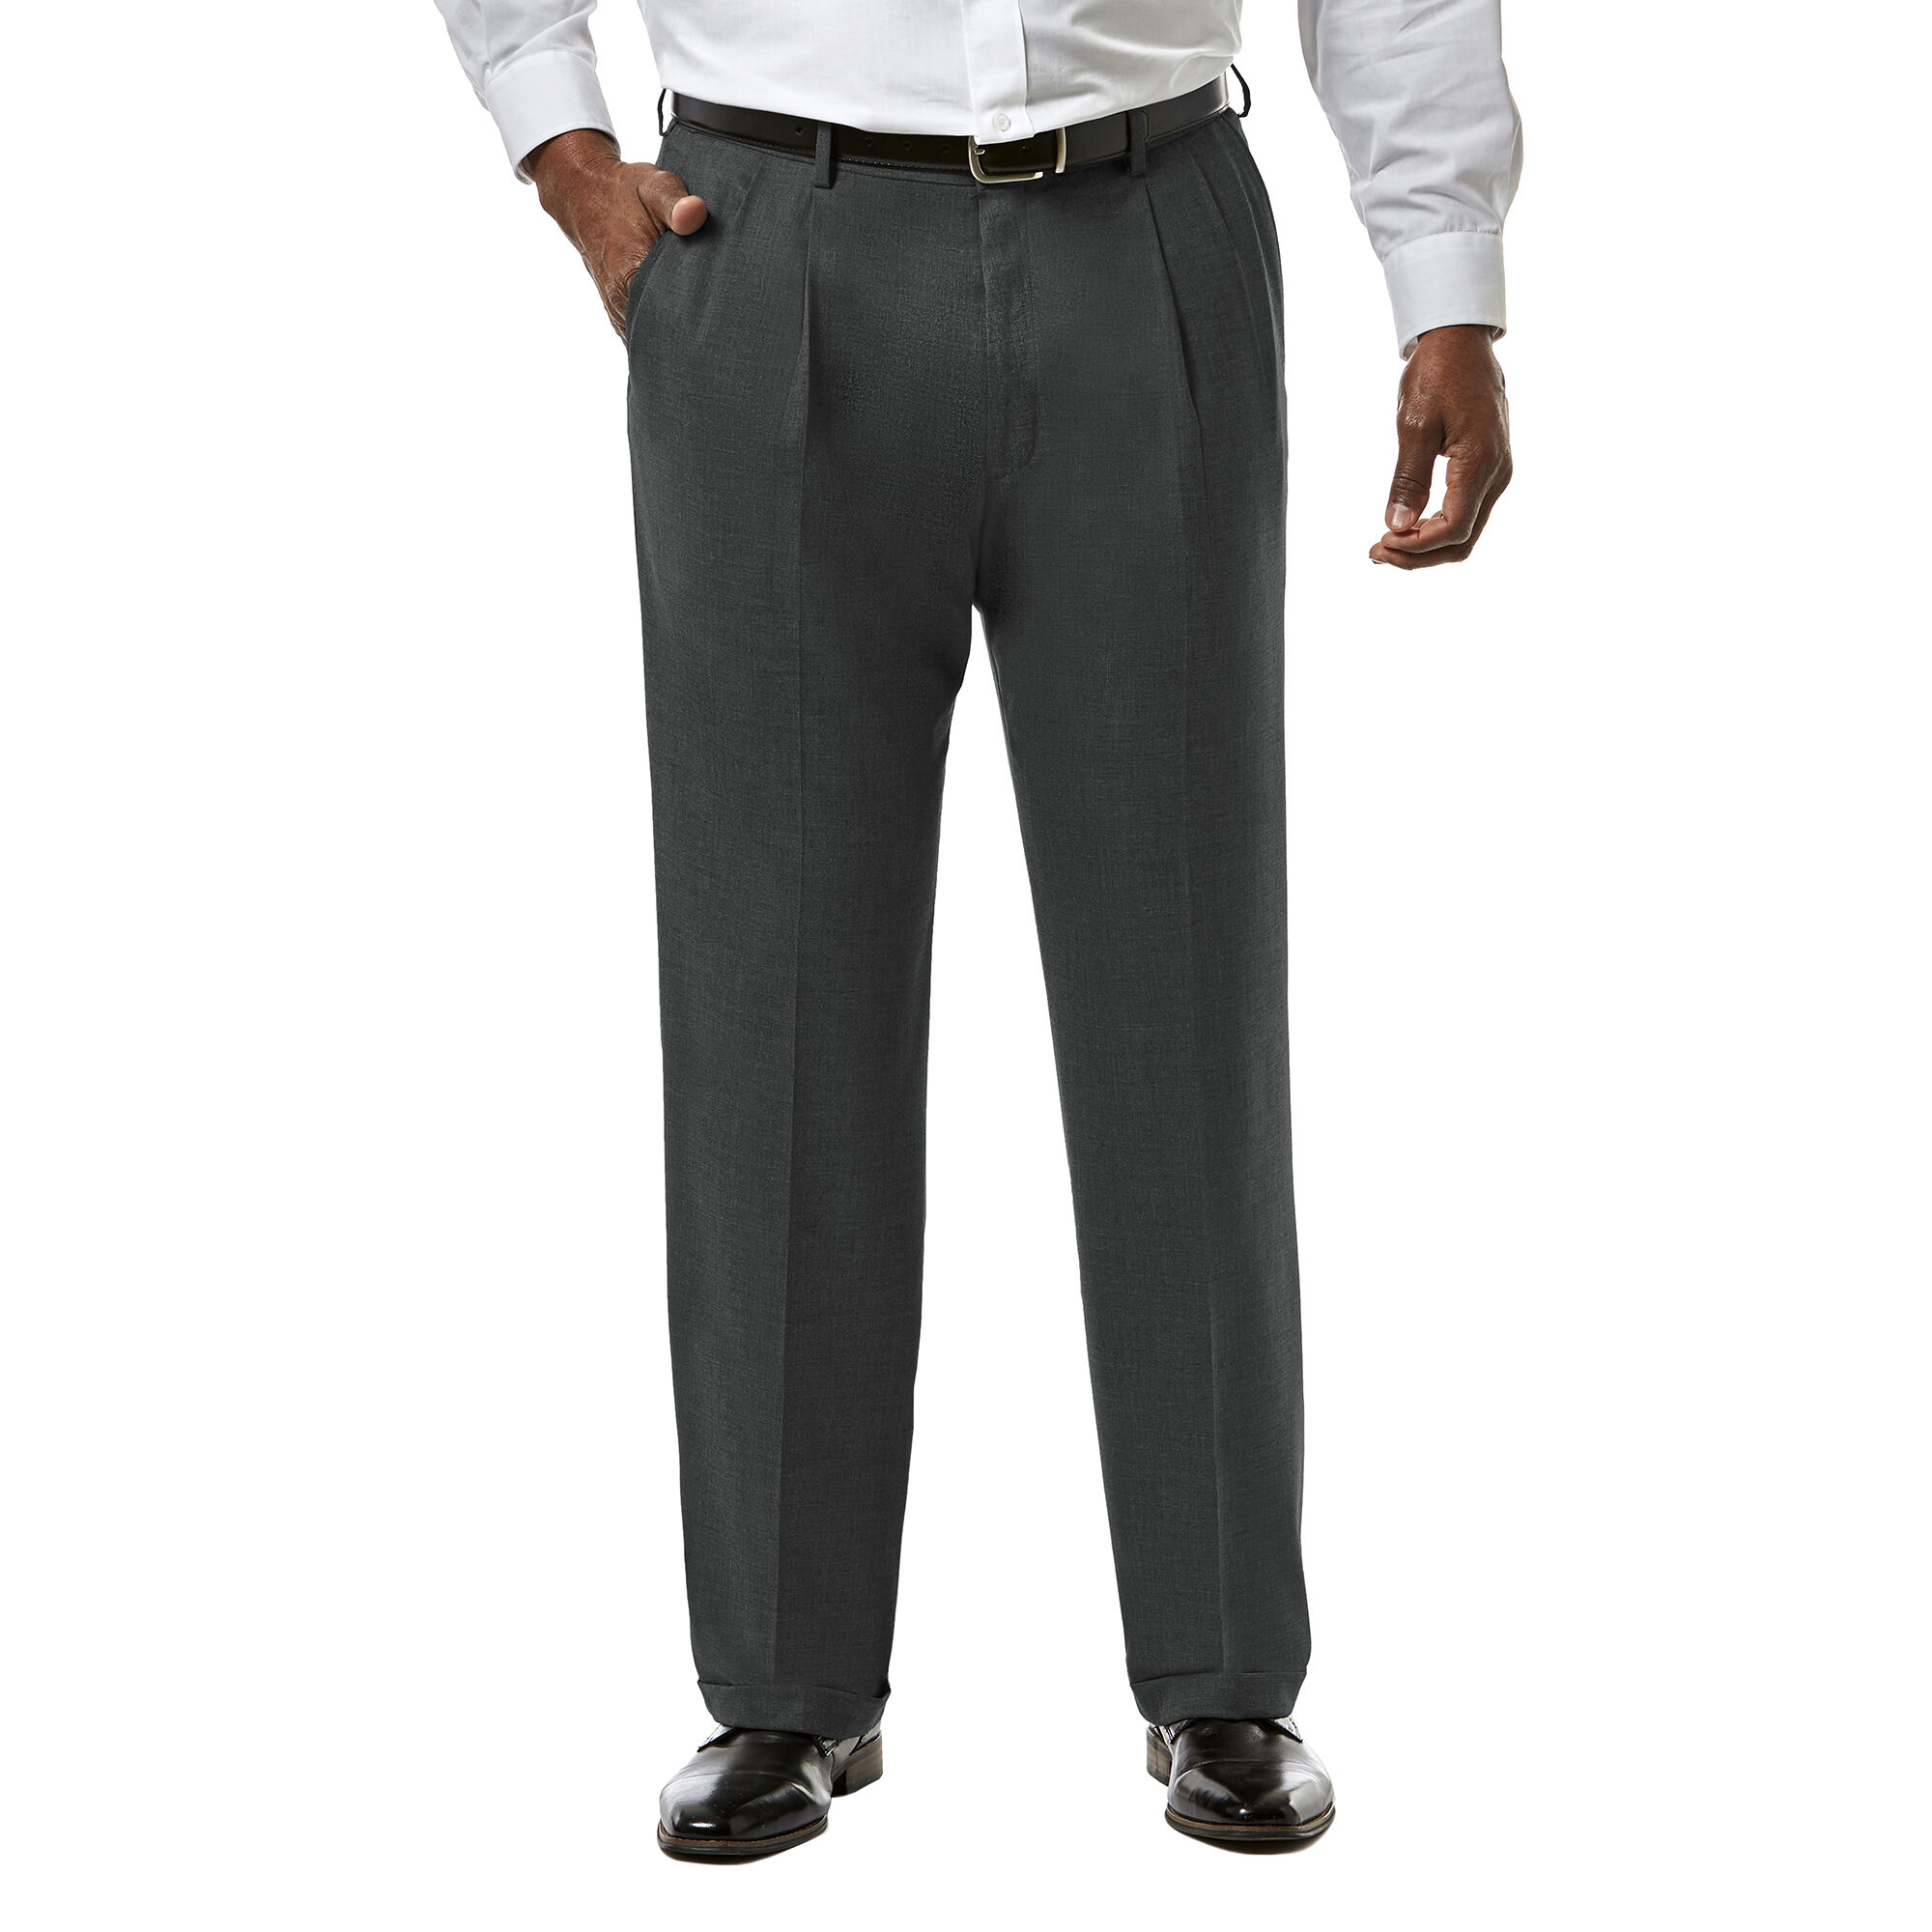 Big & Tall J.M. Haggar Premium Stretch Suit Pant - Pleated Front Medium Grey Big & Tall Classic Fit Pleated Front Hidden Expandable Waistband: Expands up to 3" 64% Polyester, 34% Viscoe Rayon 2% Spandex Dry Clean Only Imported Style #: HY91182 Size - M